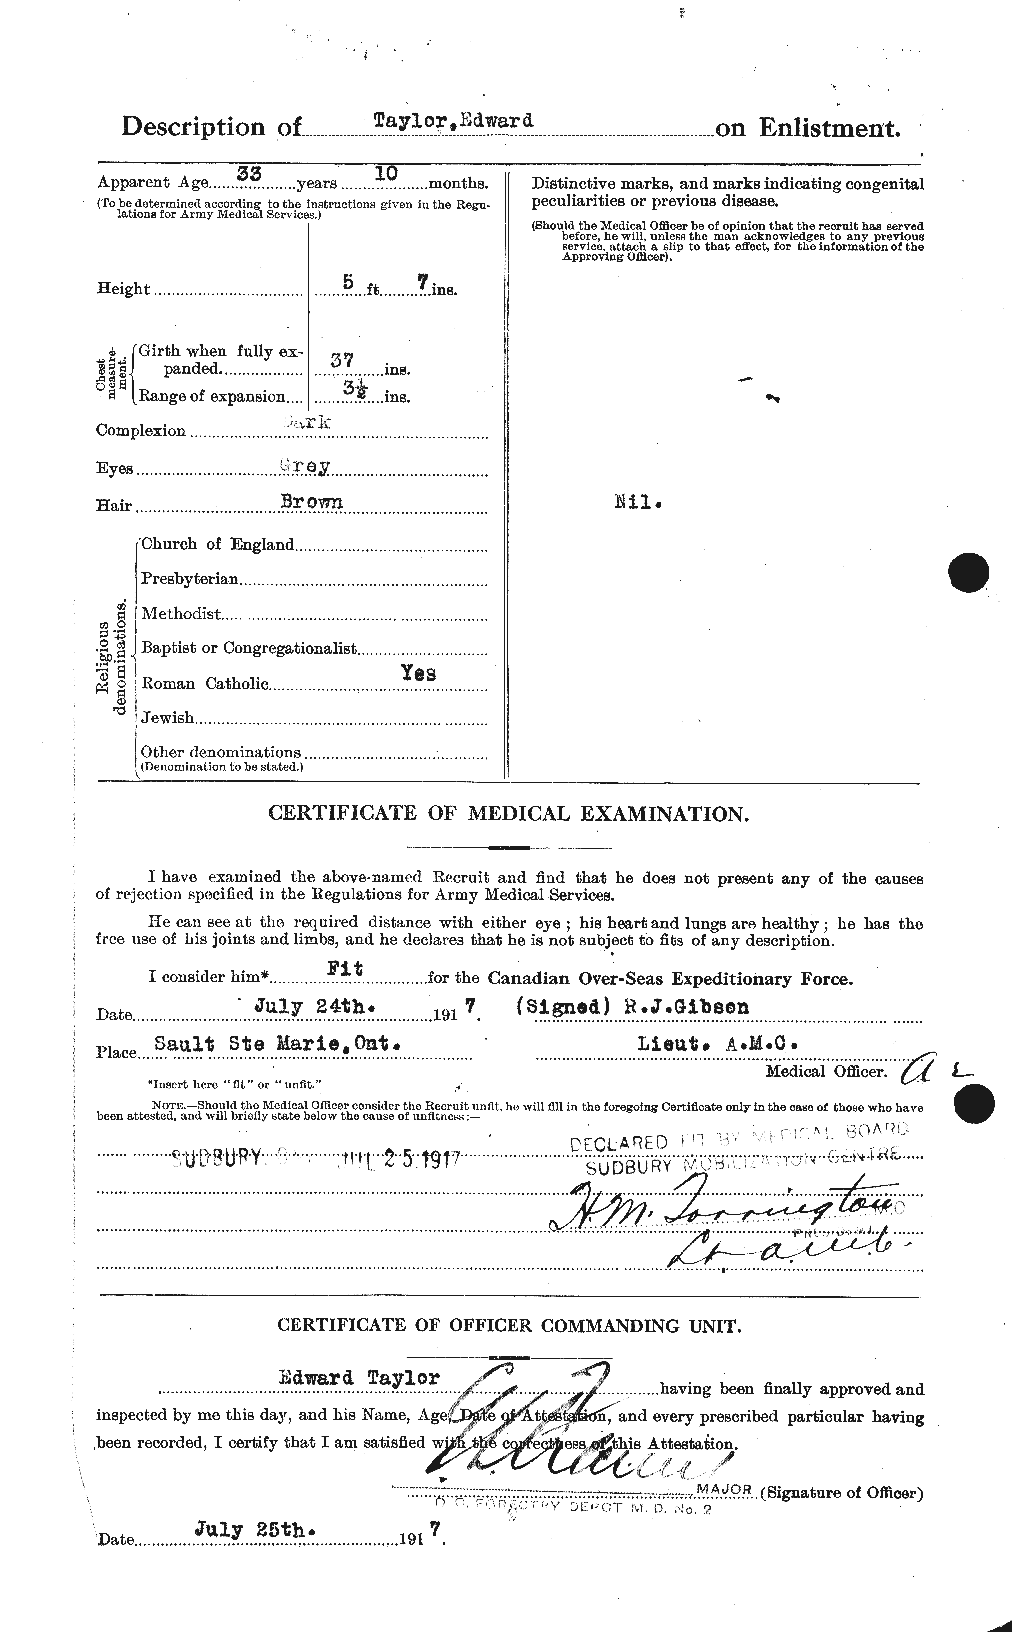 Personnel Records of the First World War - CEF 627289b